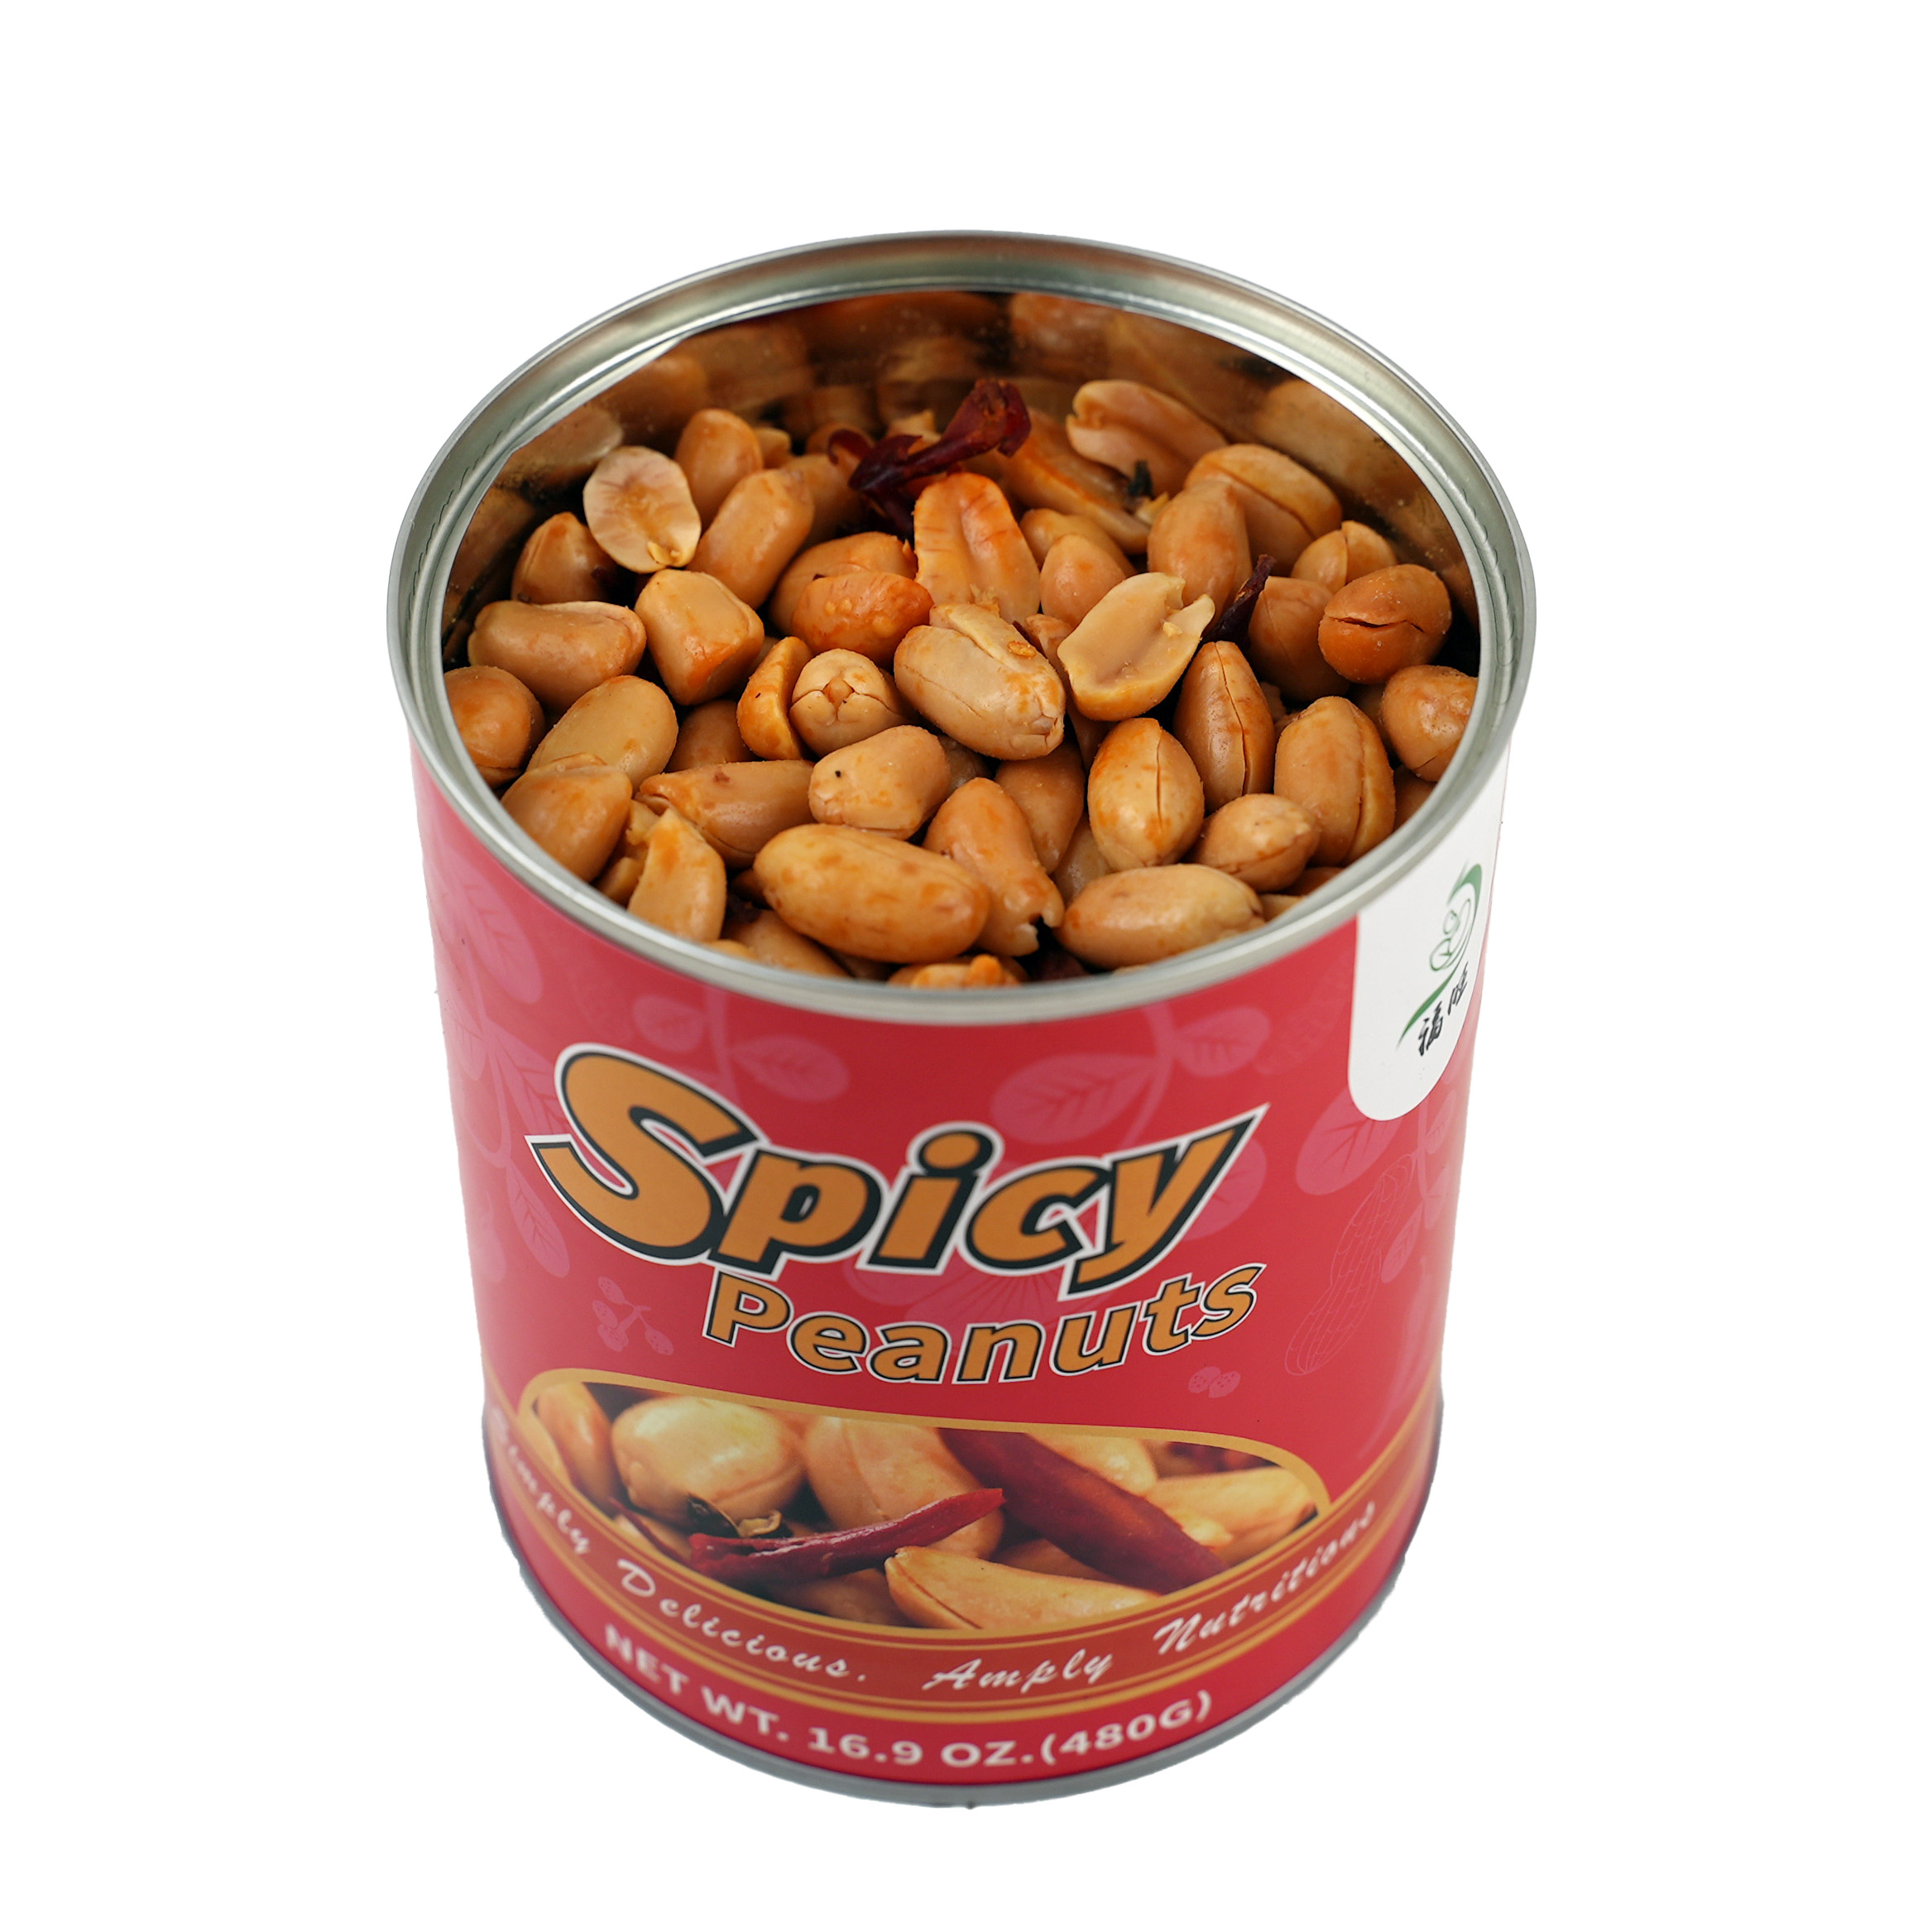 Fuwang Spicy Peanuts 480g-eBest-Nuts & Dried Fruit,Snacks & Confectionery